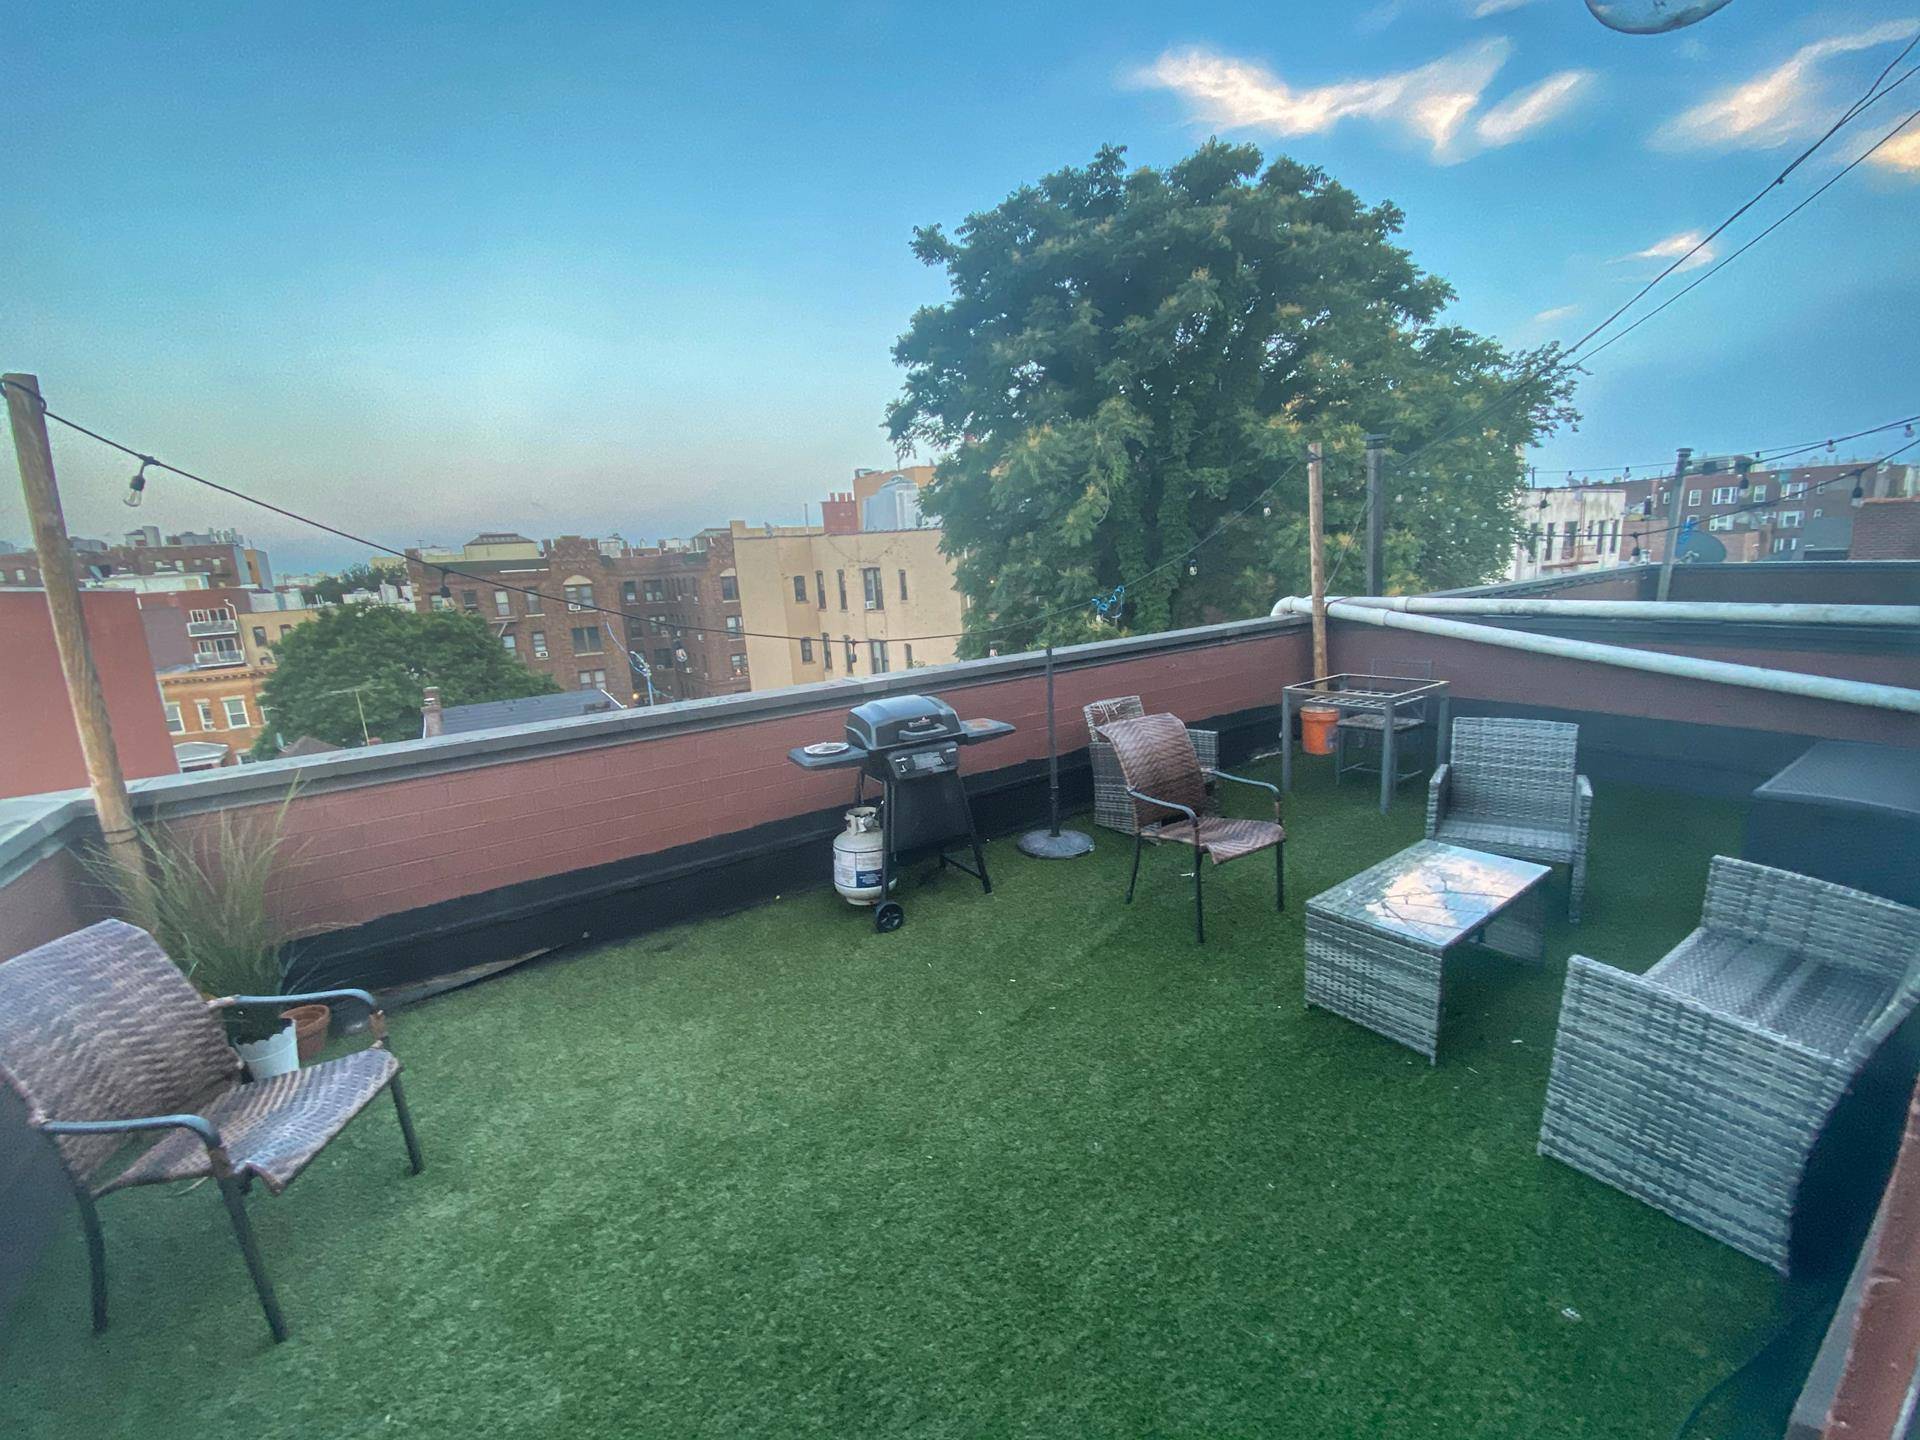 Situated in the heart of Astoria one of a kind three bedroom duplex apartment with two balconies and a large patio for lounging and grilling.